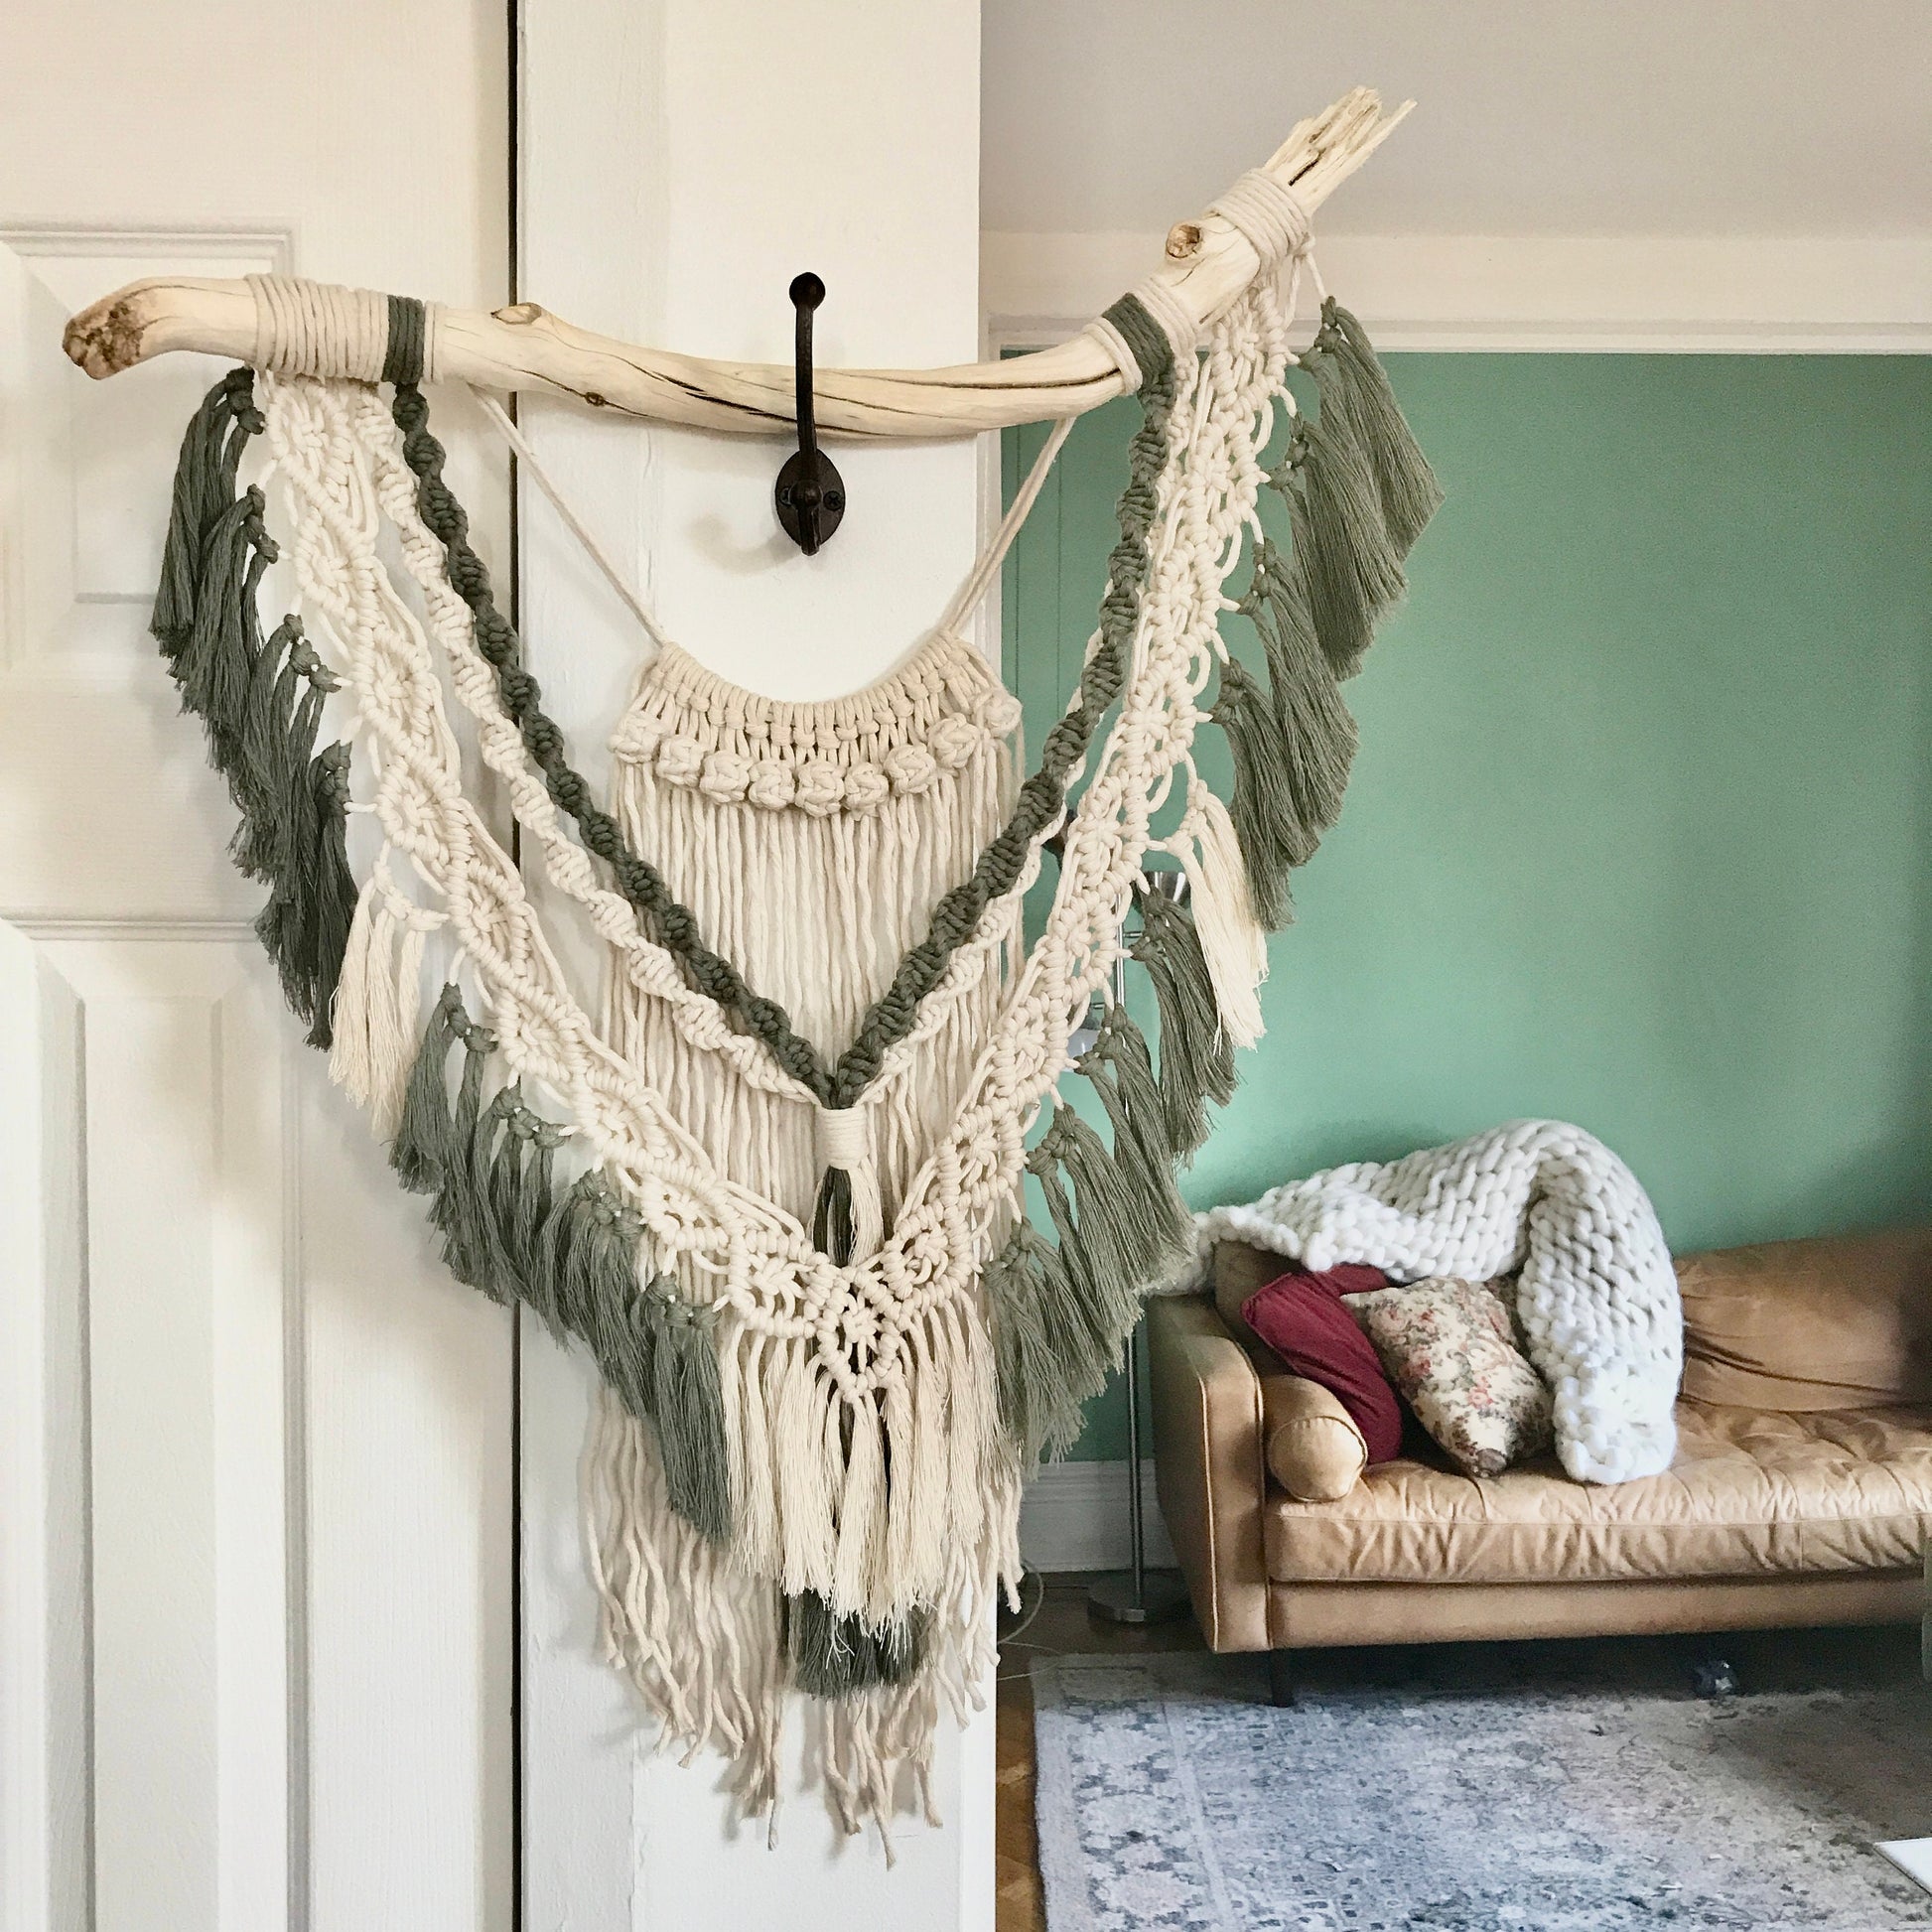 Woven Wall Tapestry, Large Macrame Wall Decor